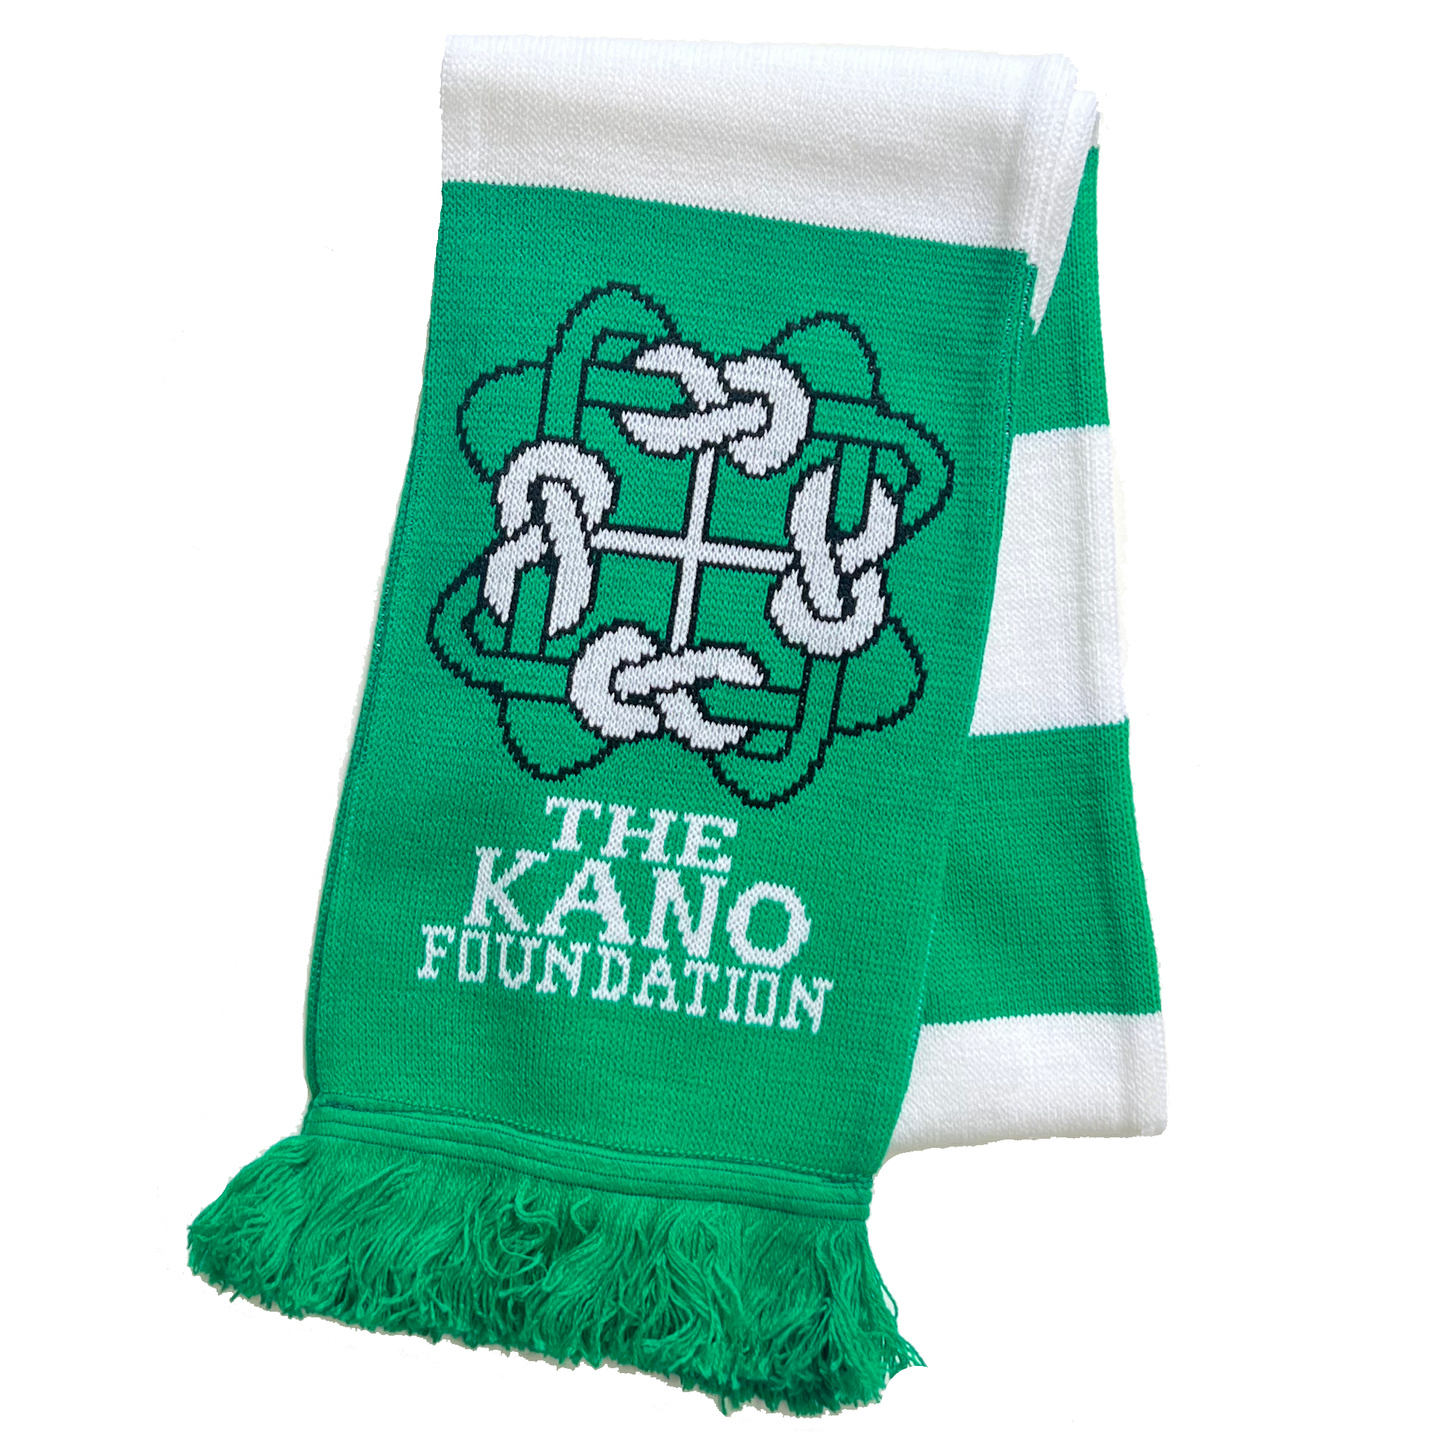 The Kano Foundation Scarf